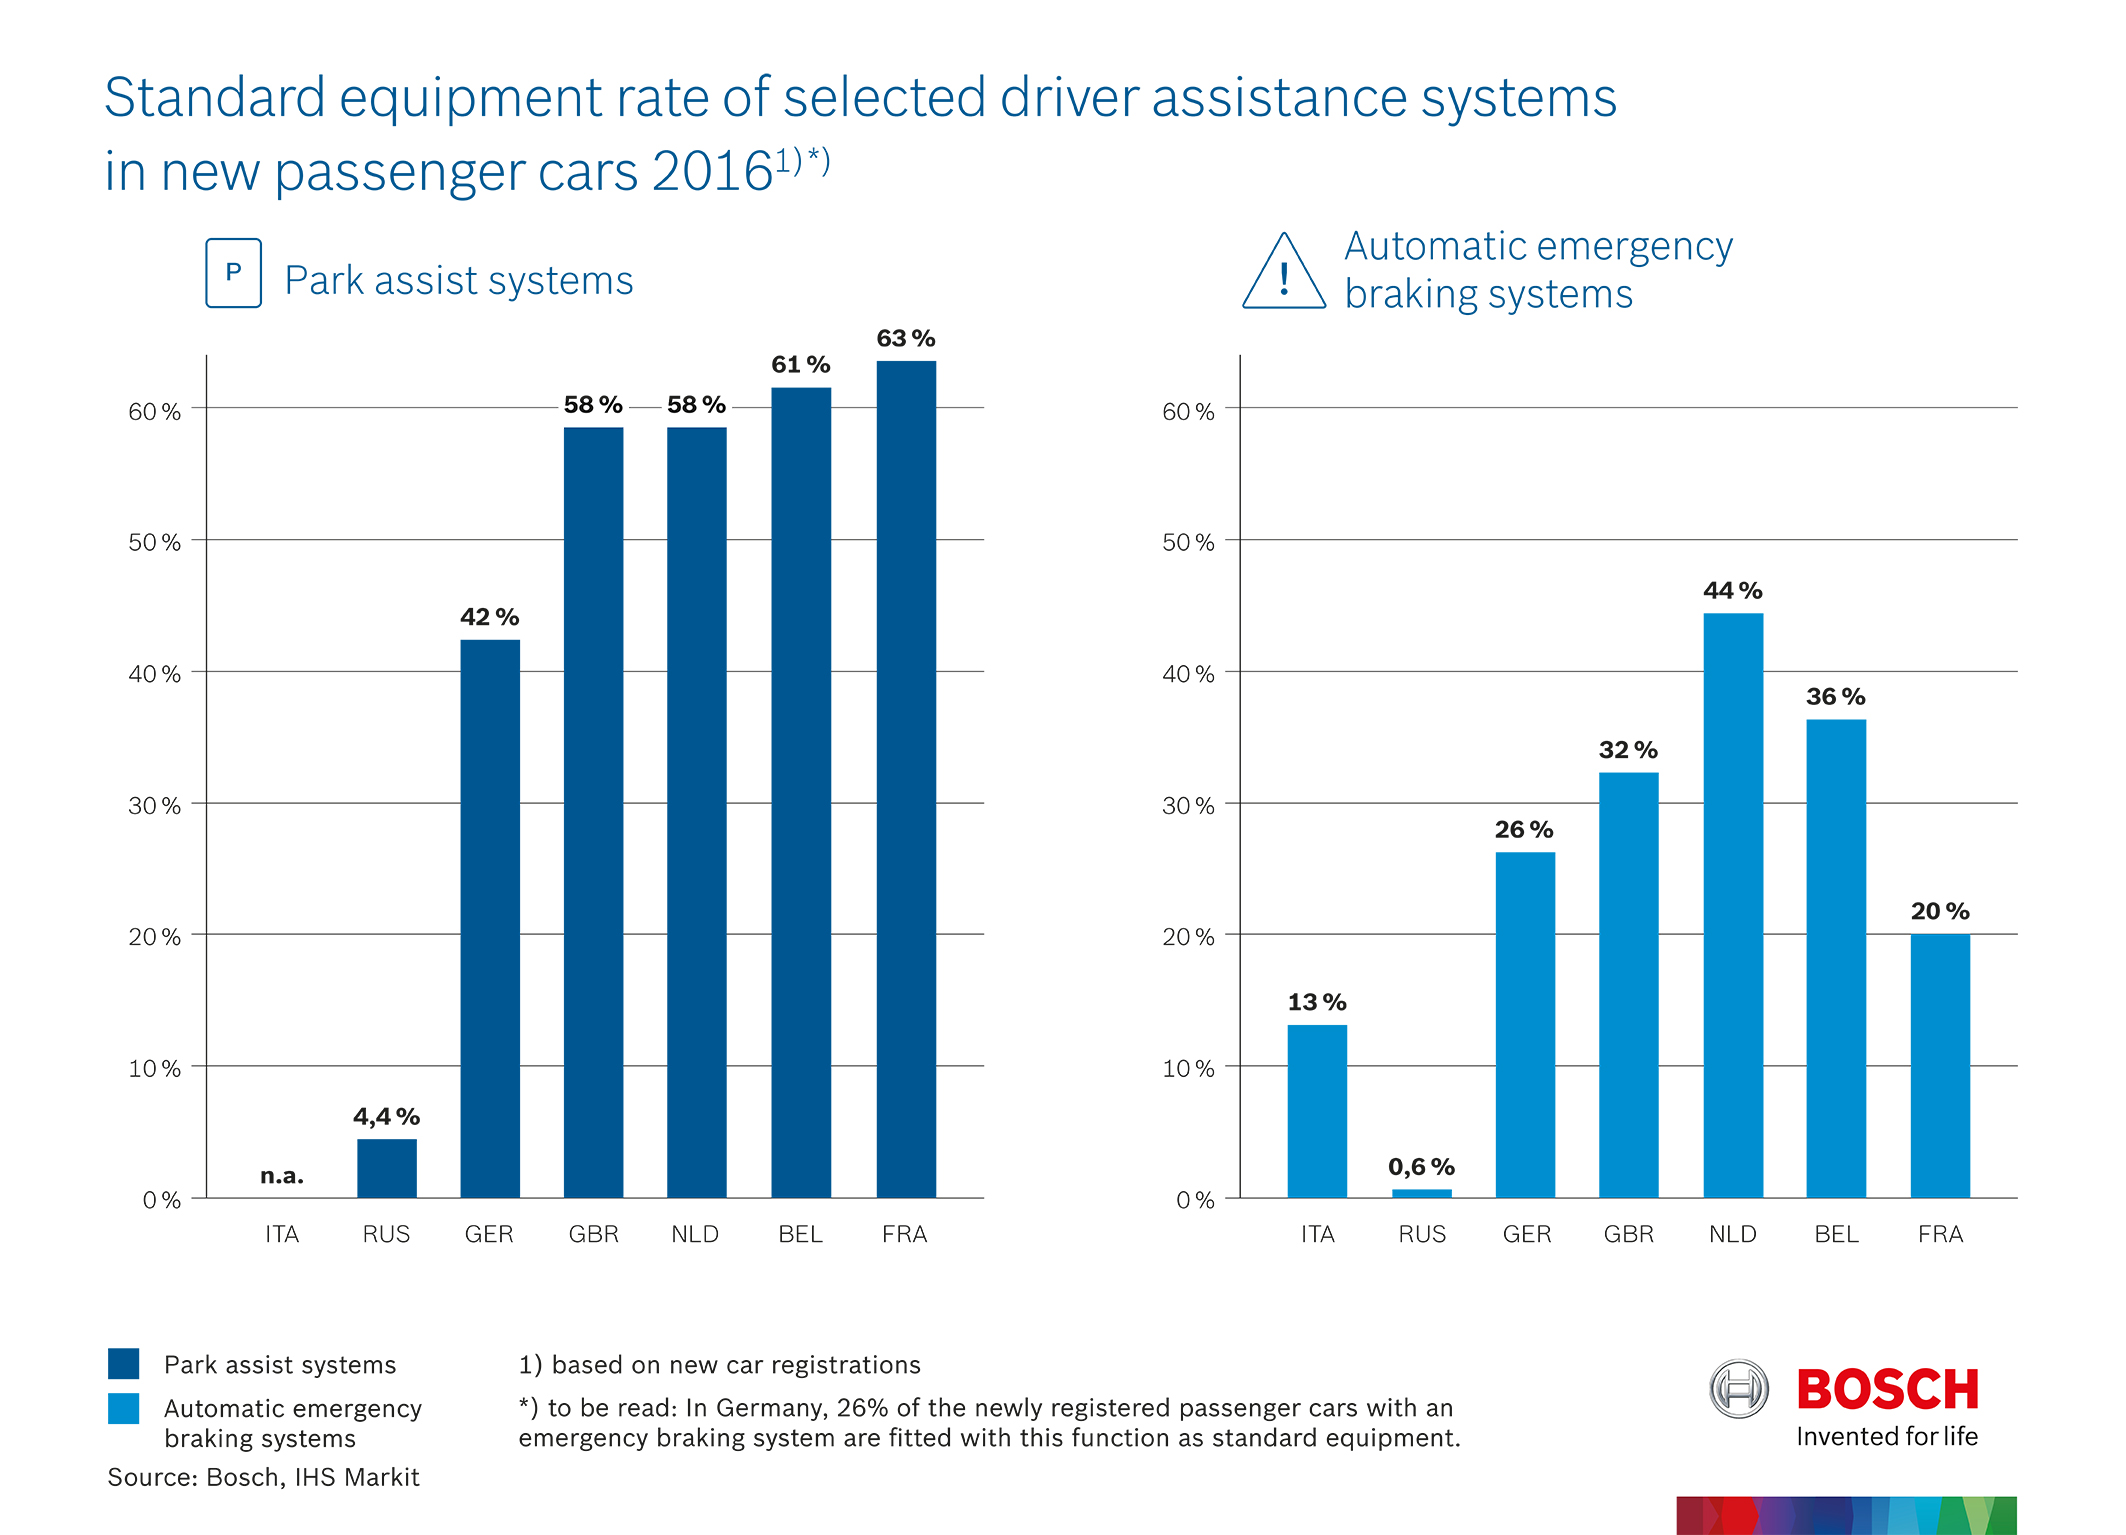 Standard equipment rate of selected driver assistance systems in new passenger cars, 2016